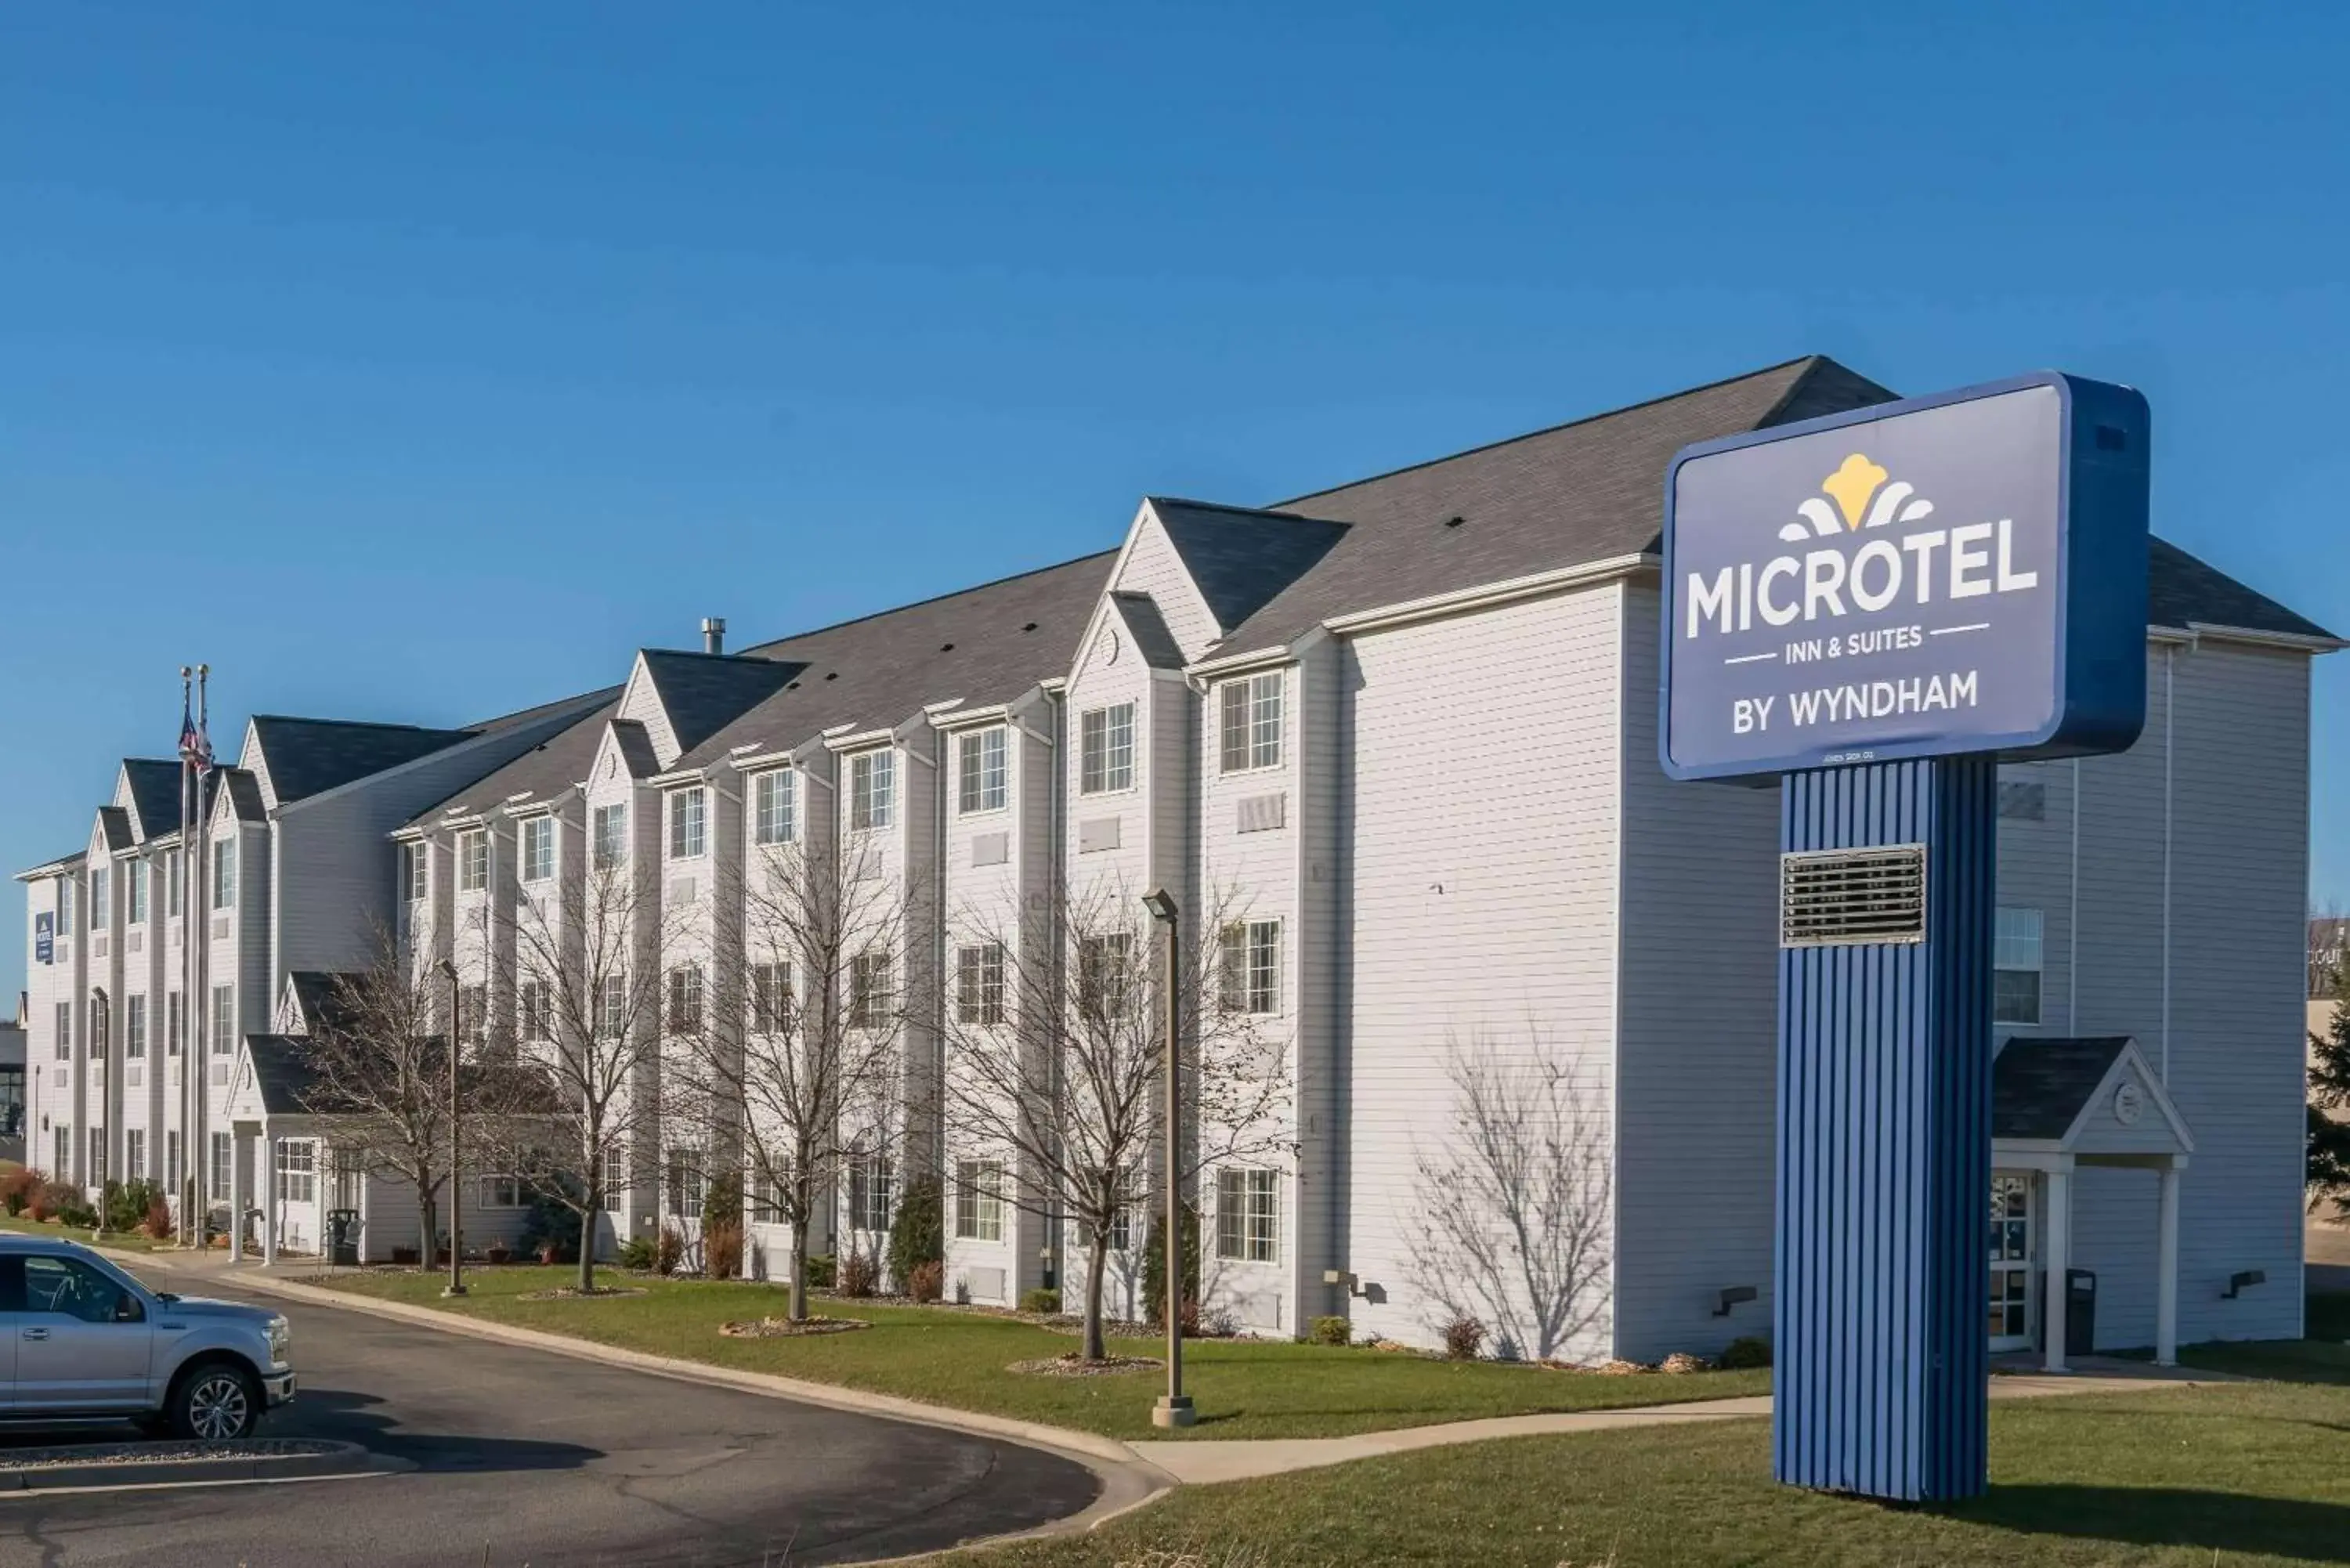 Property building in Microtel Inn & Suites by Wyndham Rochester North Mayo Clinic